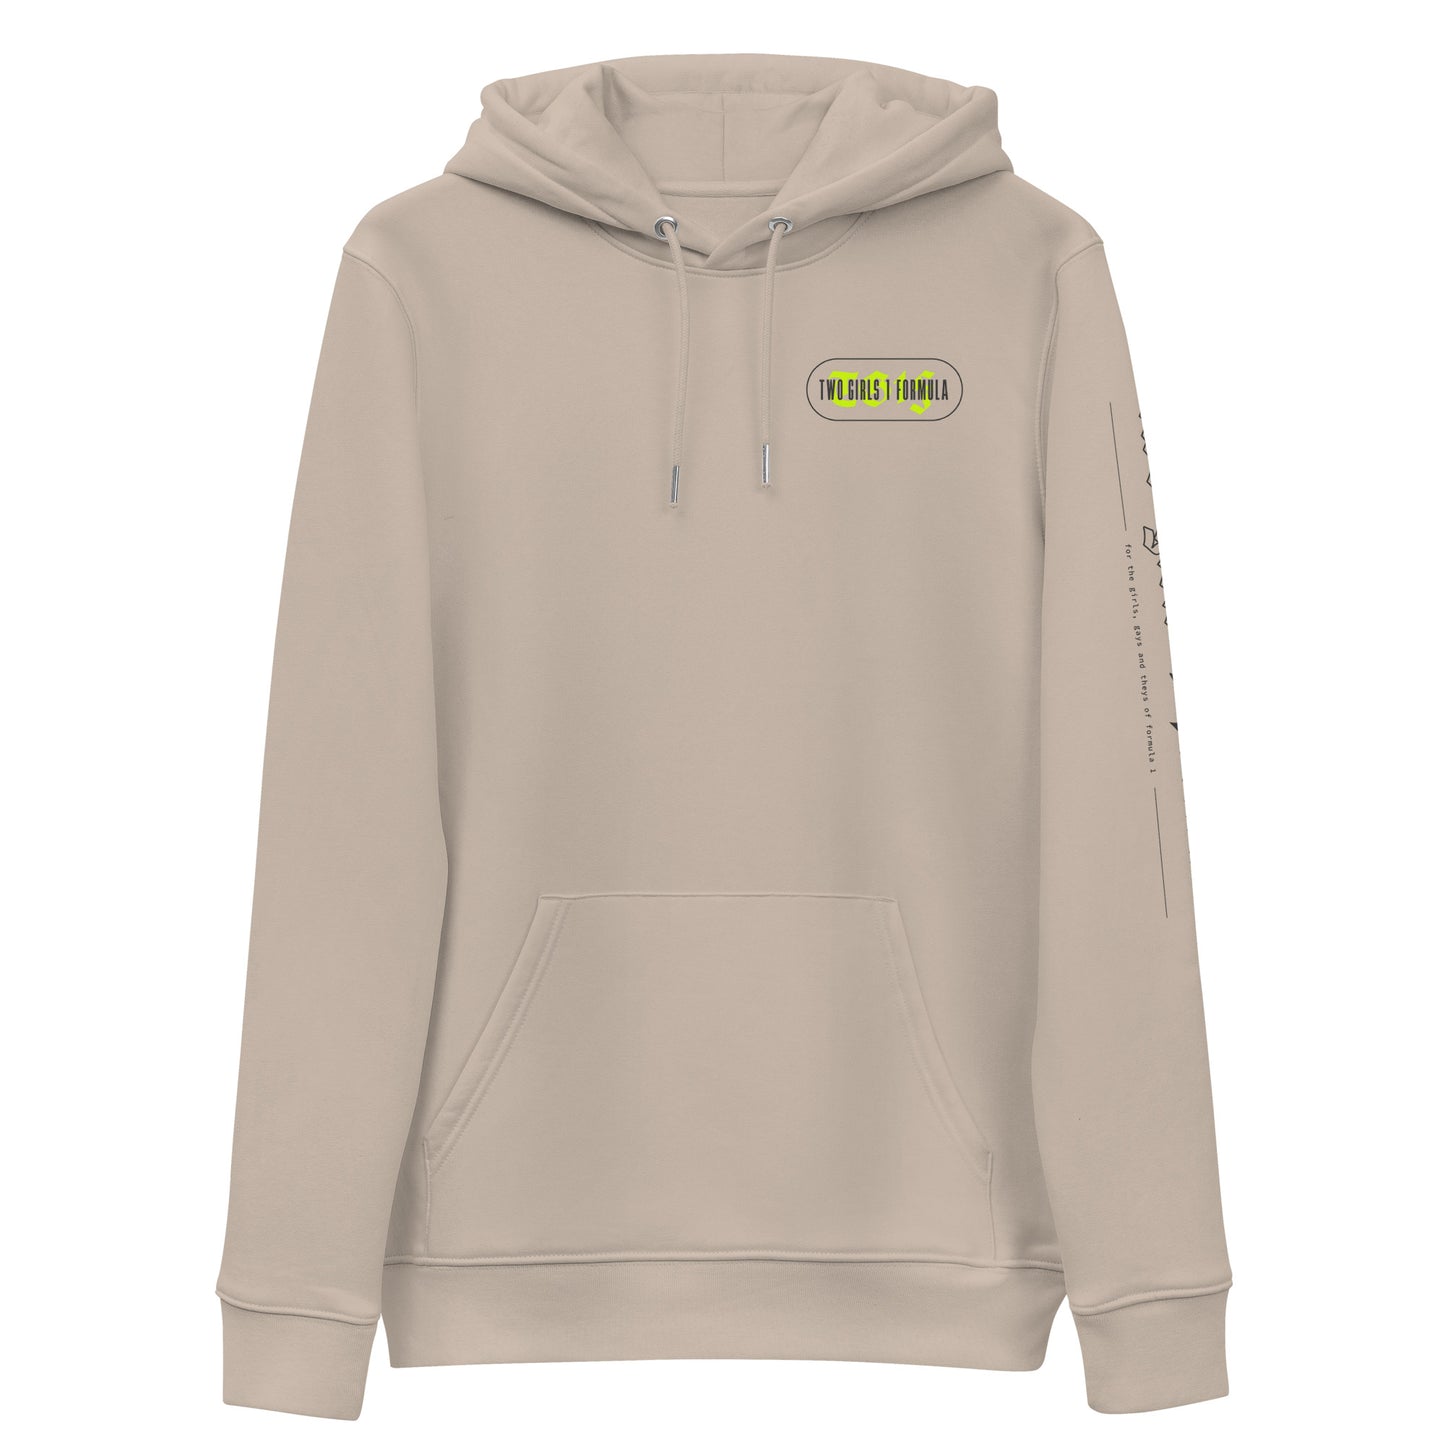 How to TG1F hoodie